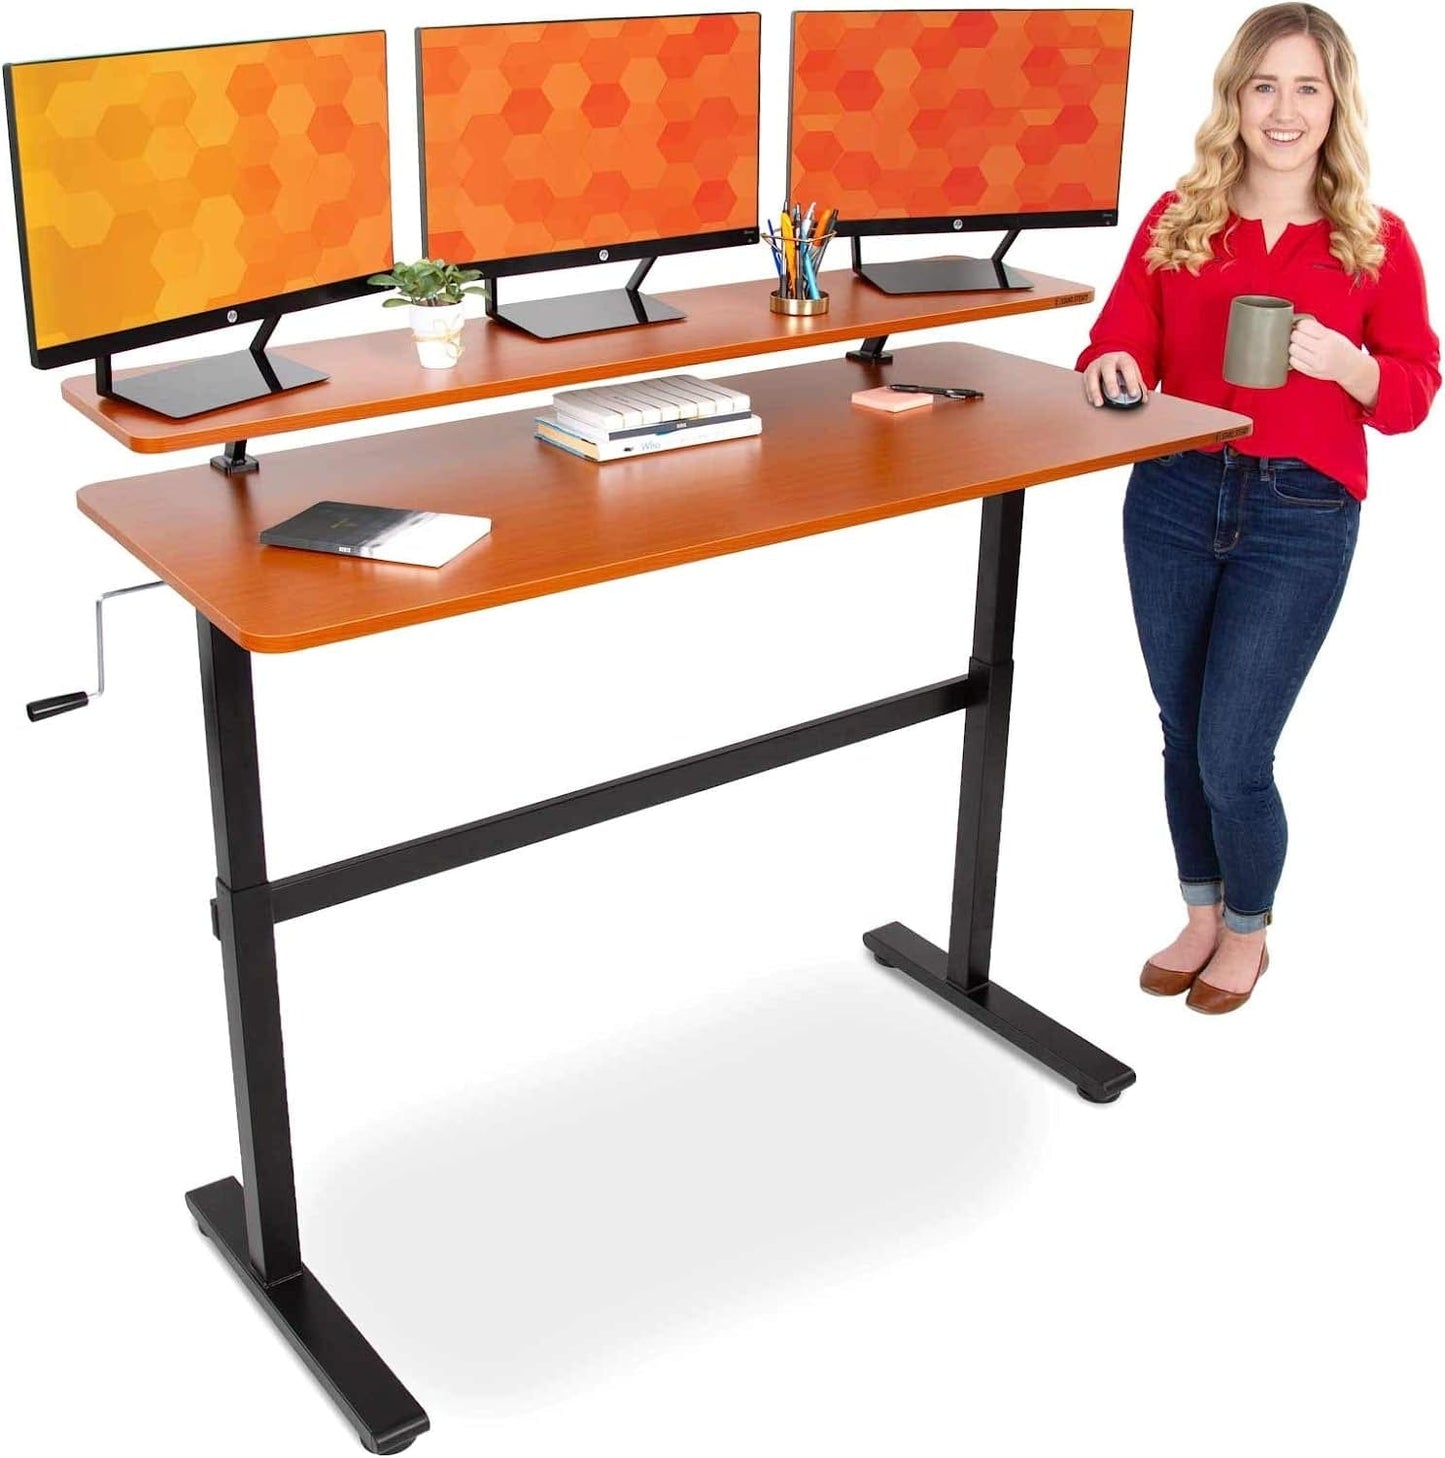 StandUp Desk Depot Cherry + Shelf Tranzendesk 55 in Standing Desk with Clamp on Shelf | Crank Manual Height Adjustable Stand up Desk with Attachable Monitor Riser | Holds 3 Monitors & Adds Extra Desk Space (55/Cherry)